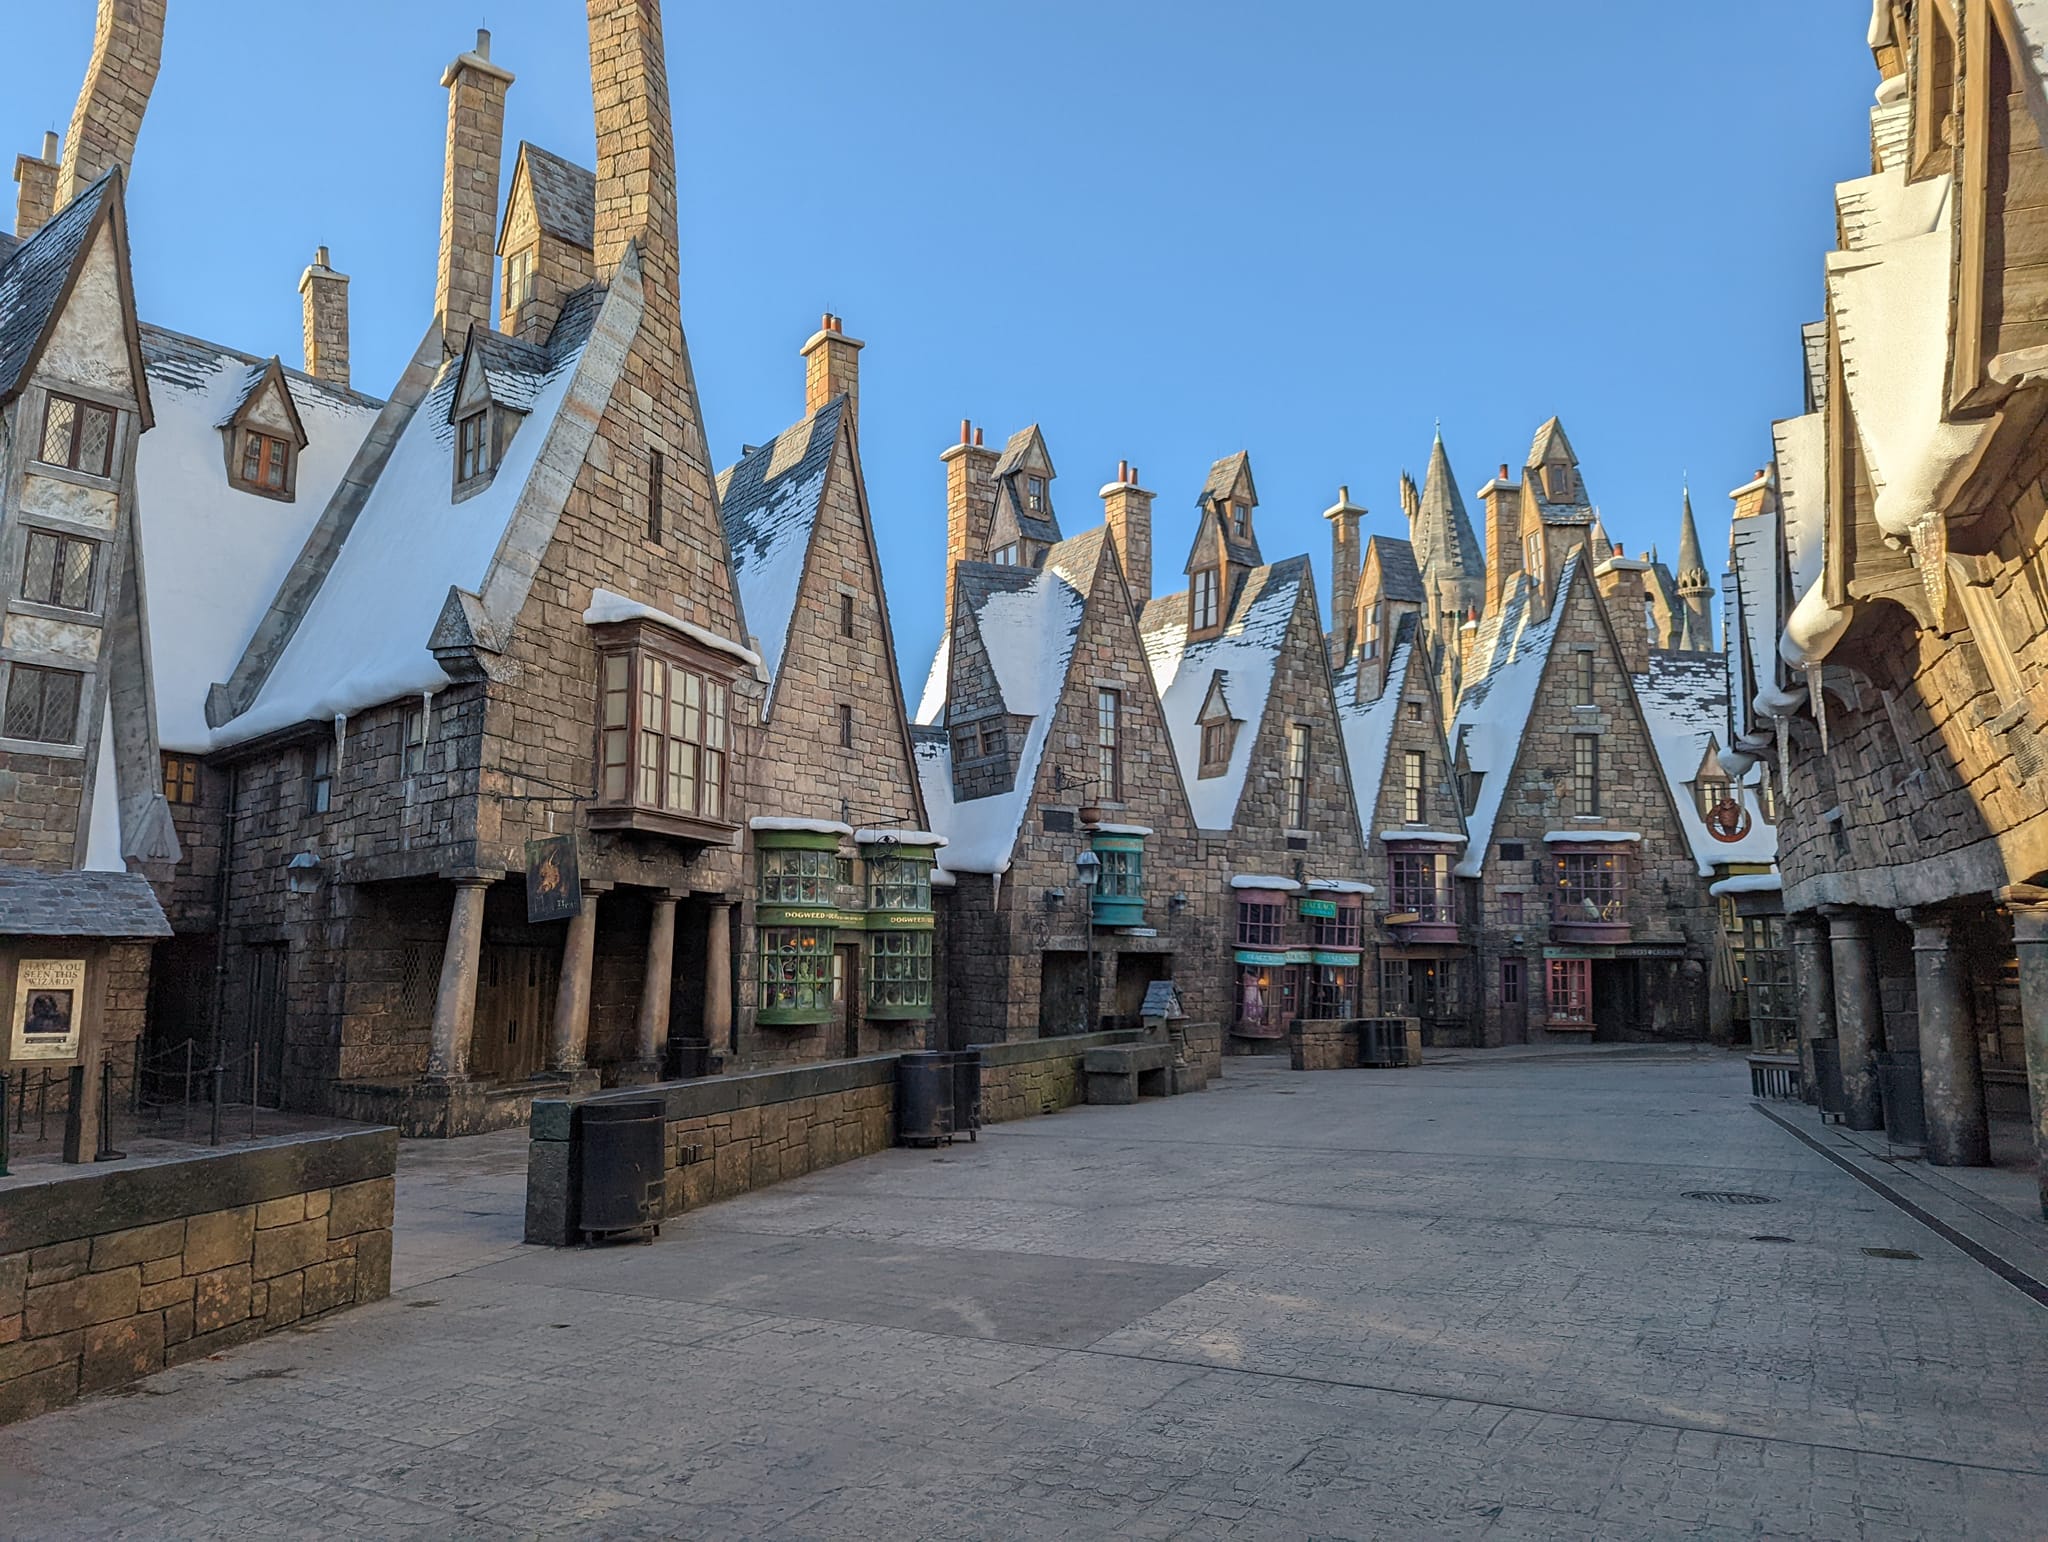 Wizarding world of Harry Potter pretty empty during early park admission!